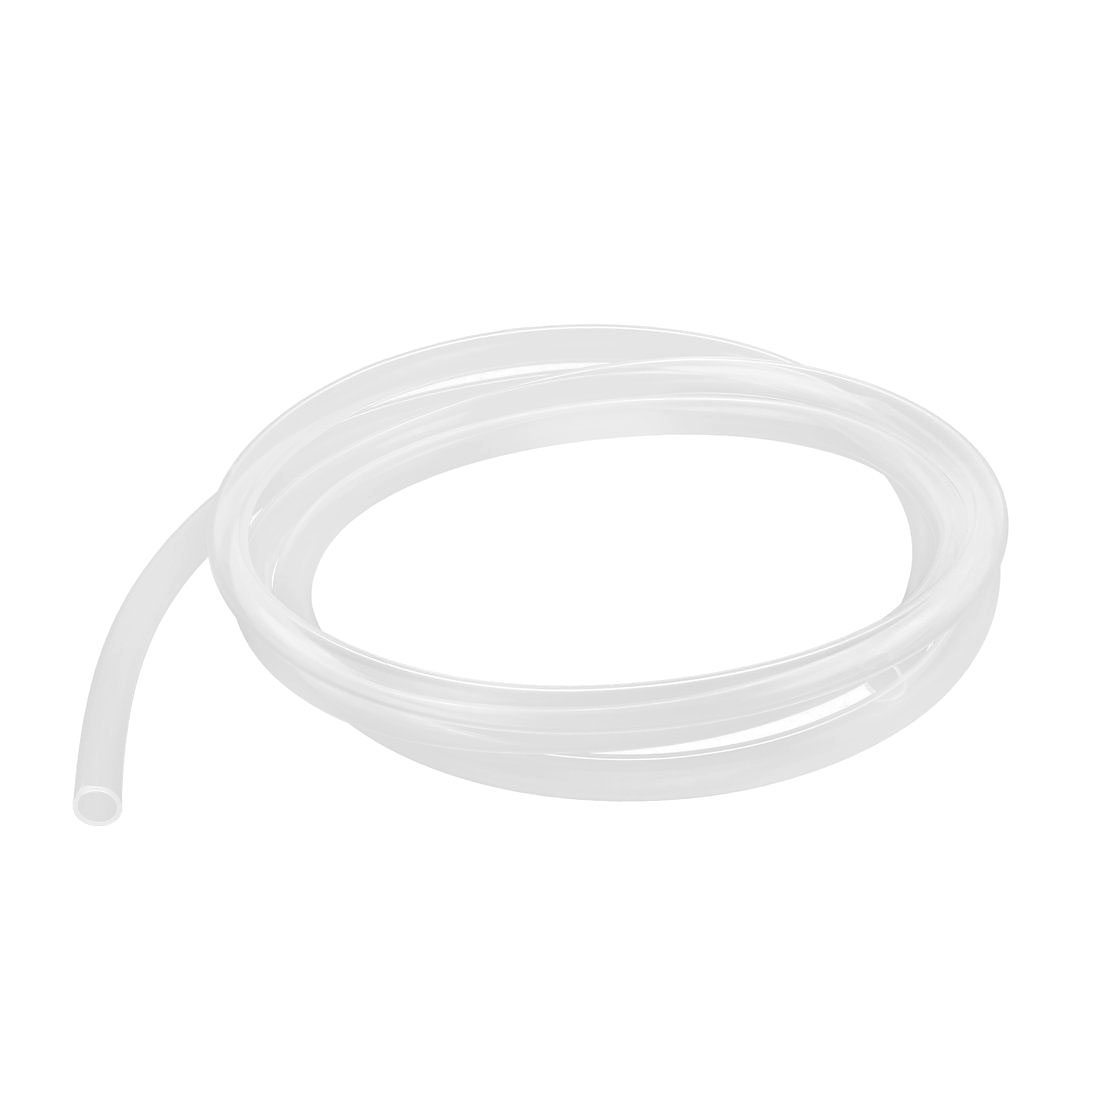 sourcingmap Silicone Tube 2mm ID X 5mm OD 3.3 Flexible Silicone Rubber Tubing Water Air Hose Pipe Transparent for Pump Transfer 